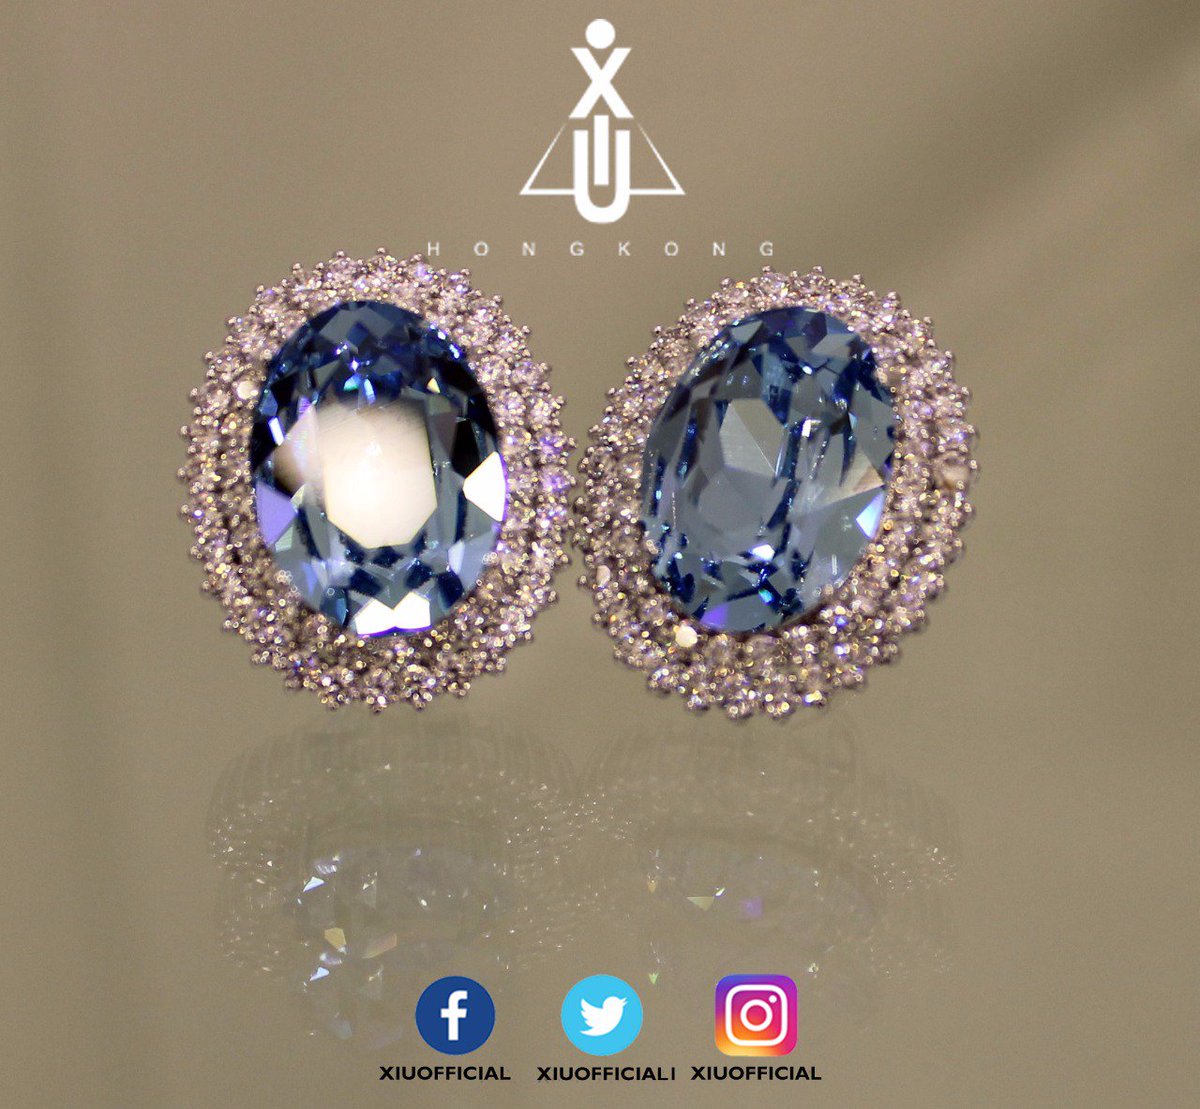 XIU-201850400811
Elegant yet Affordable Jewellery ❤
Grab these Beautiful Earrings with Free Home Delivery Nationwide!!
Perfect for all Occasions 
Inbox to Order 
#fashionconnection
#earringblue
#bluecrystal #blues #earringsforsale
#lovelyearrings #salesalesale
#ramazanmubarak